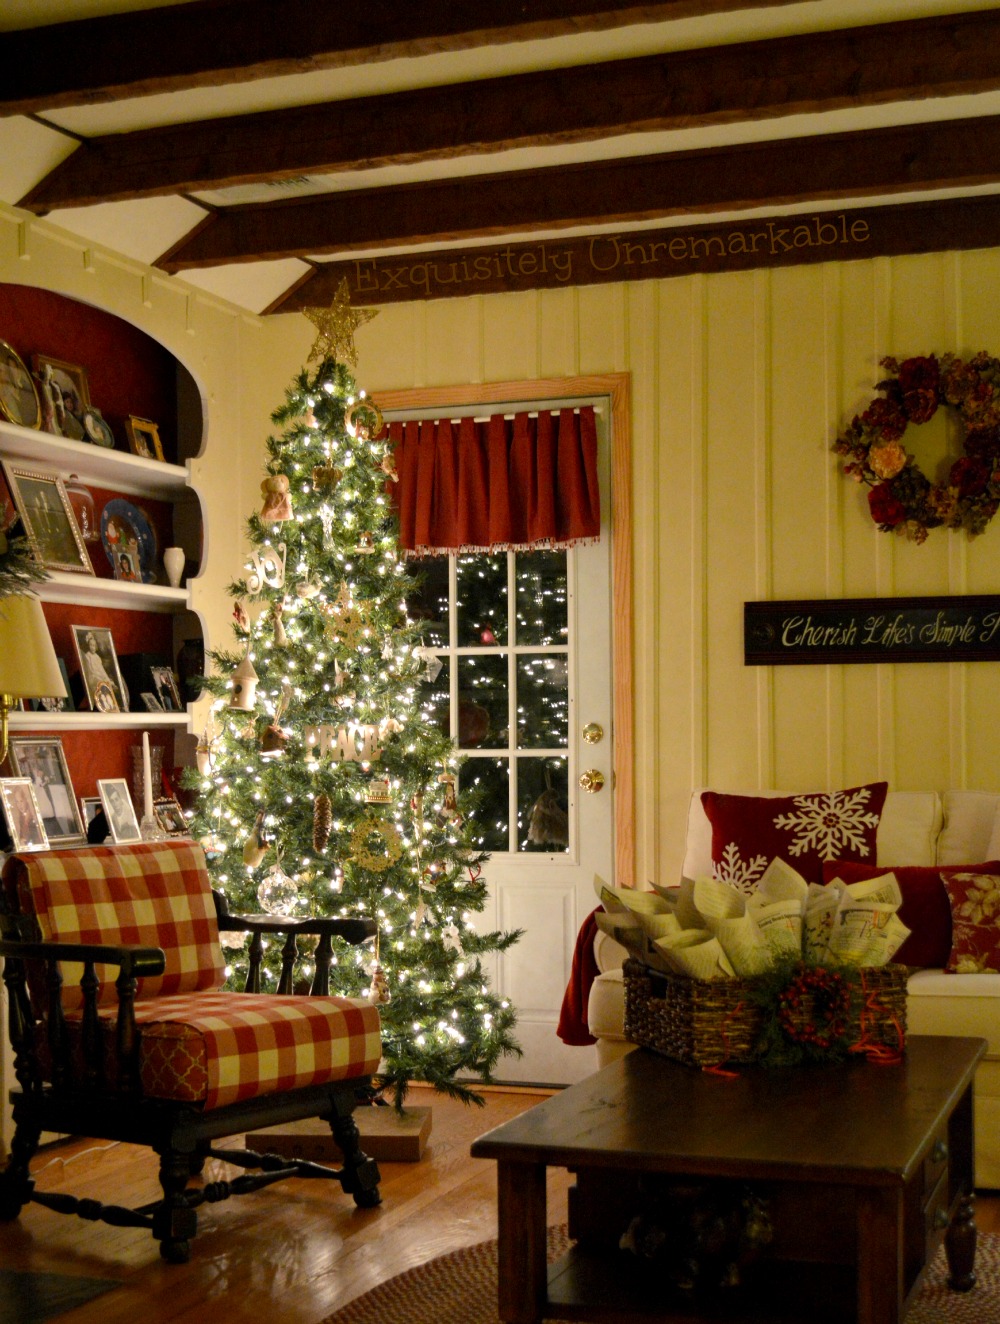 A Simple, Rustic Christmas - Exquisitely Unremarkable